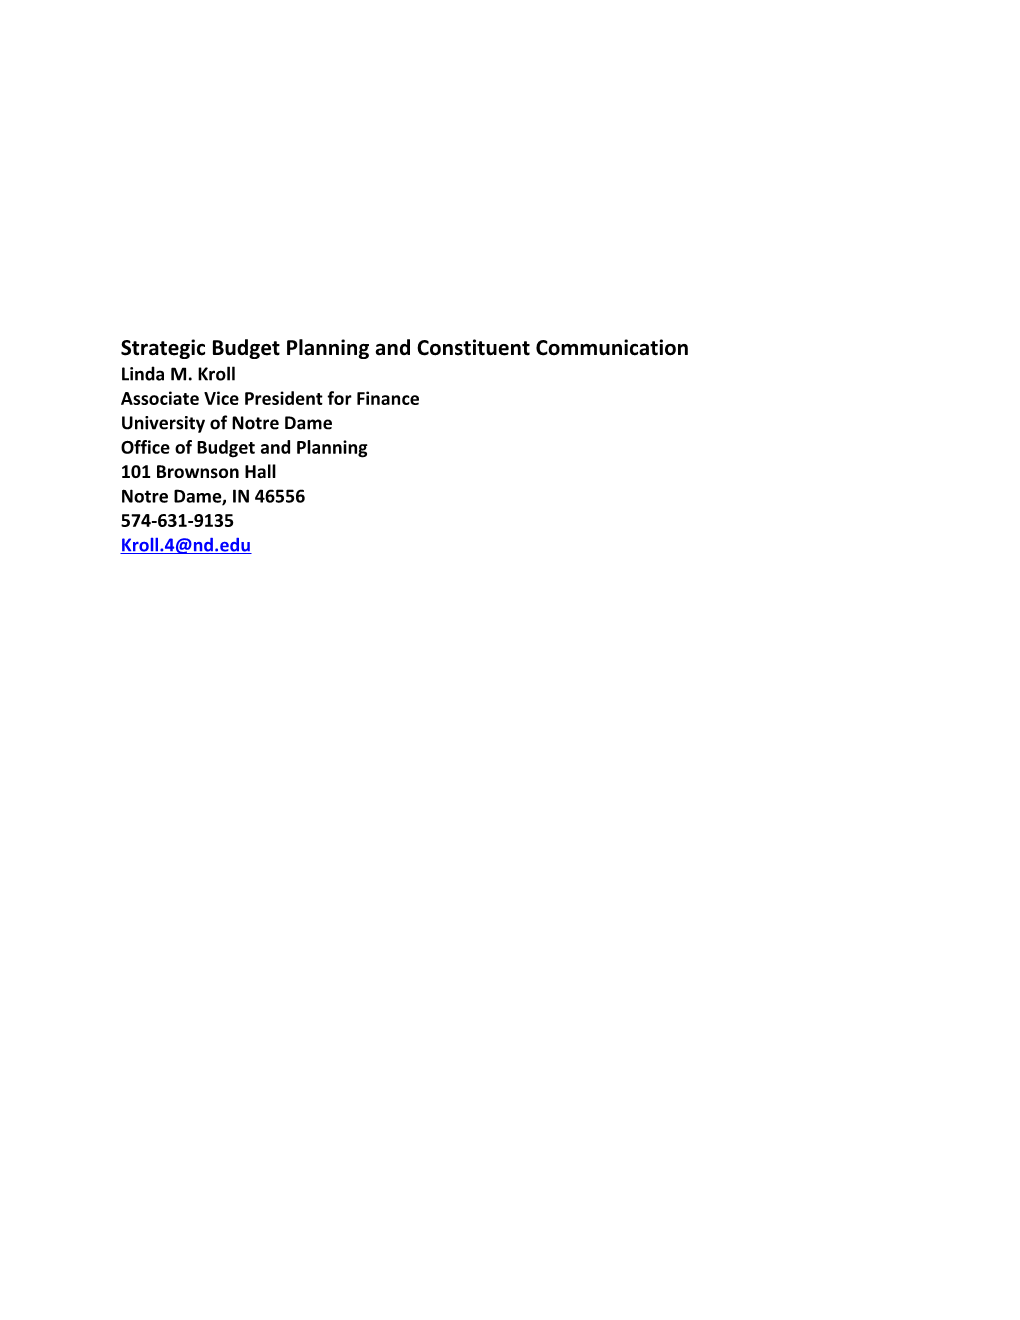 Strategic Budget Planning and Constituent Communication